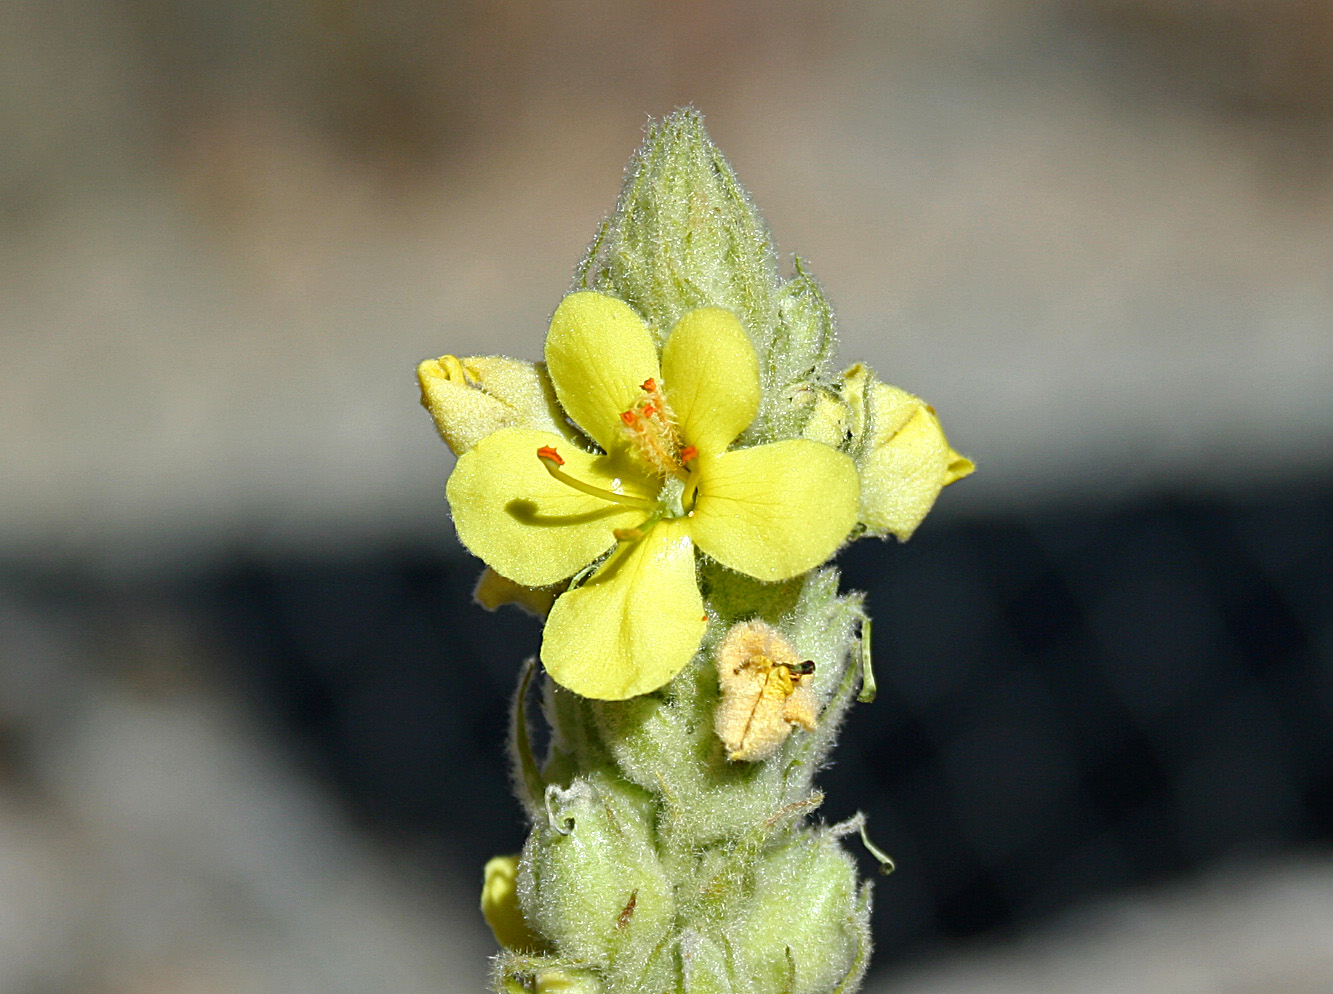 Tip of inflorescence with open, yellow flower and visible pollen